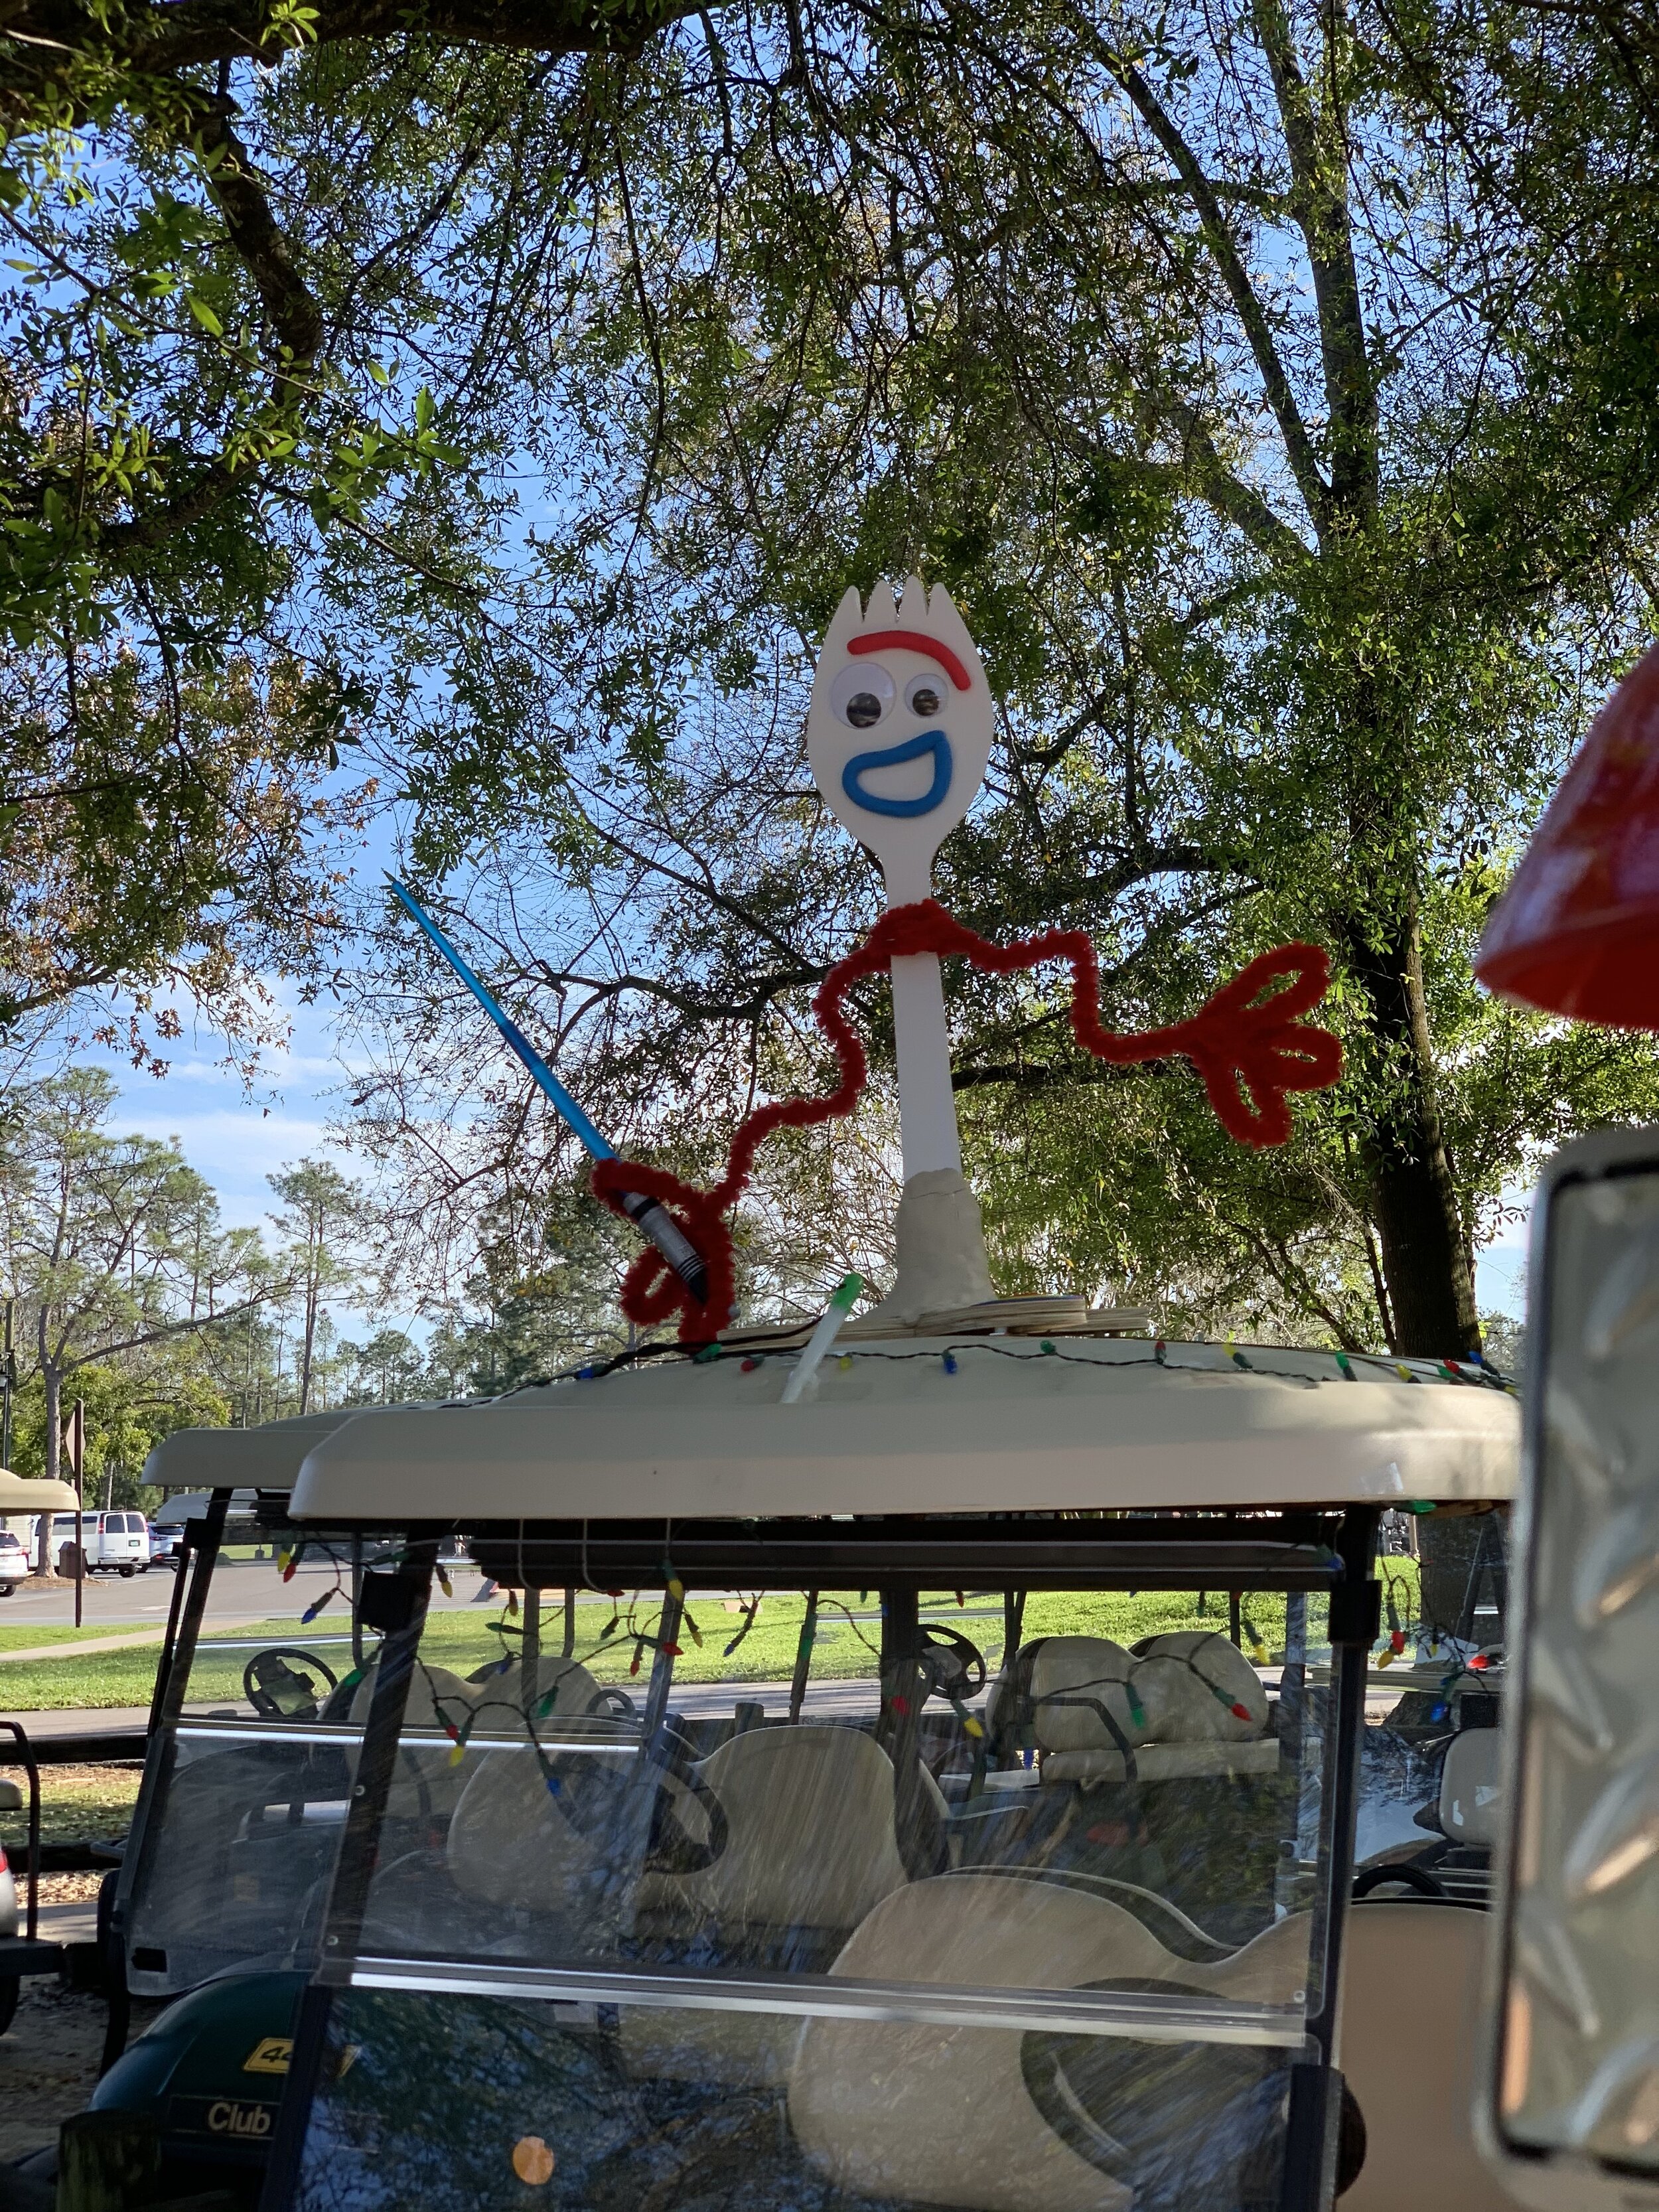  Forky, from Toy Story 4, effectively recreated by a fan for the top of their golf cart. 